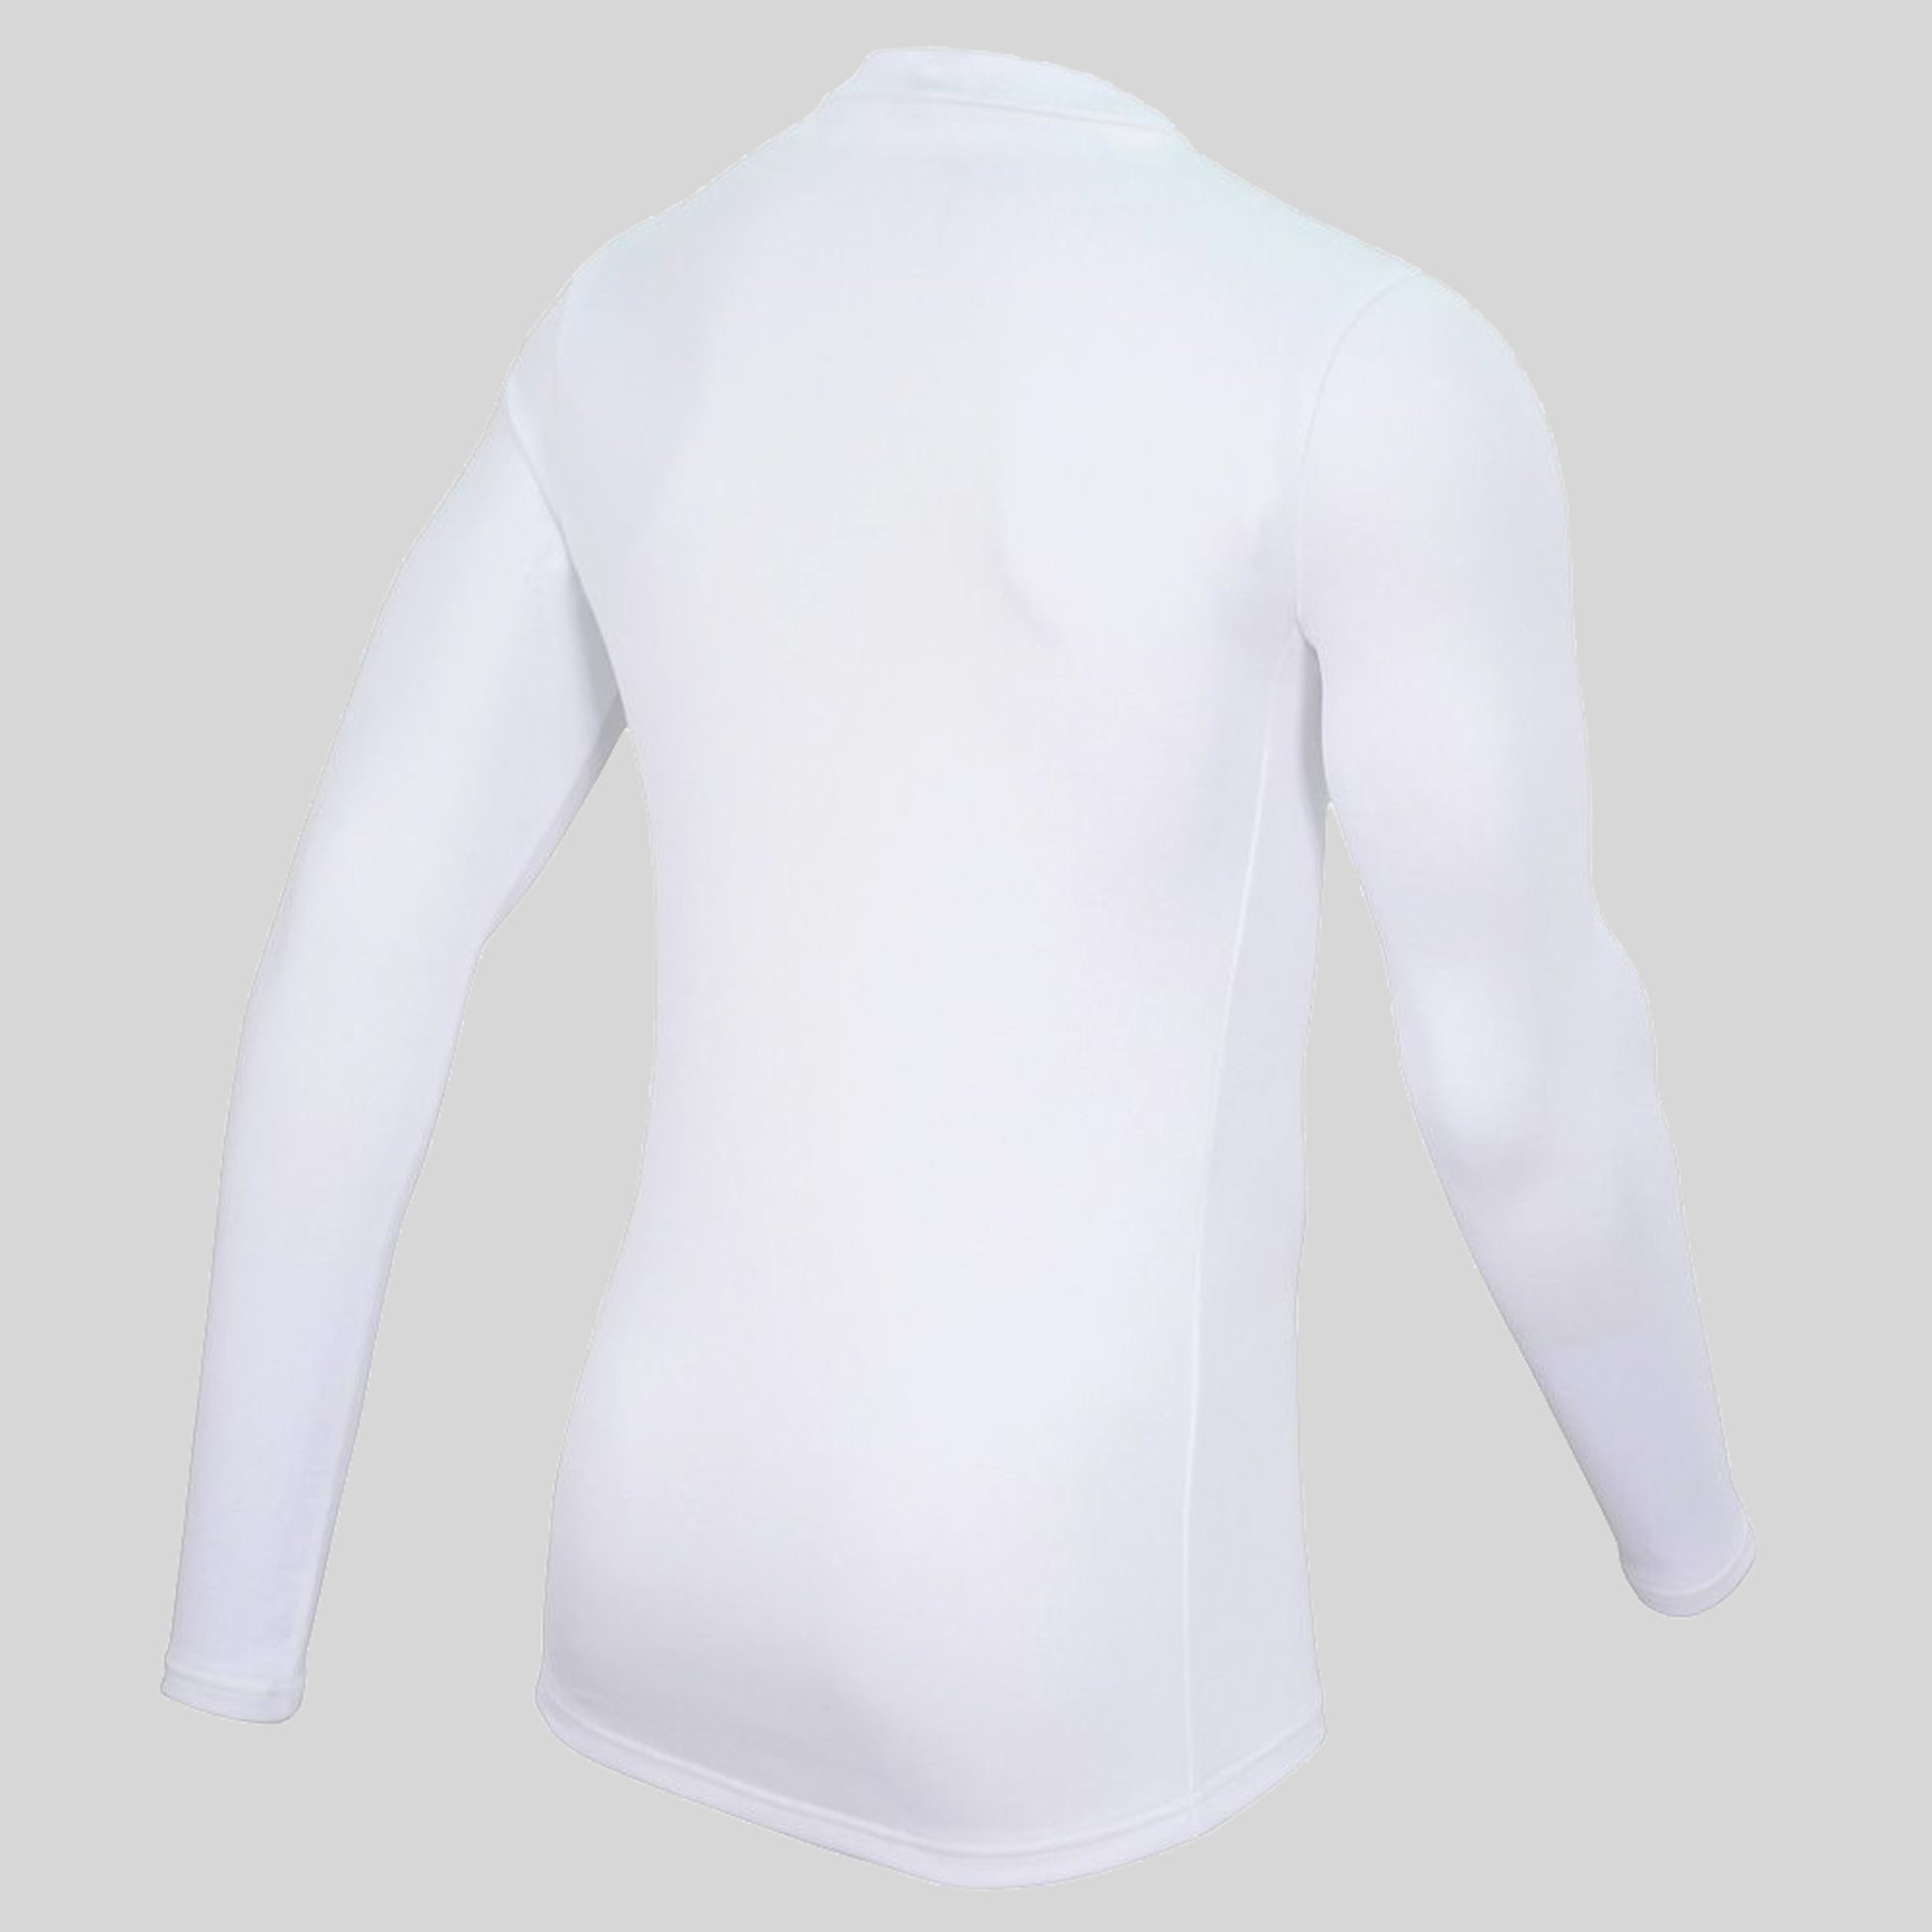 Long Sleeve Baselayer White by Cuore of Switzerland for Ascender Cycling Club Zürich Switzerland Back View